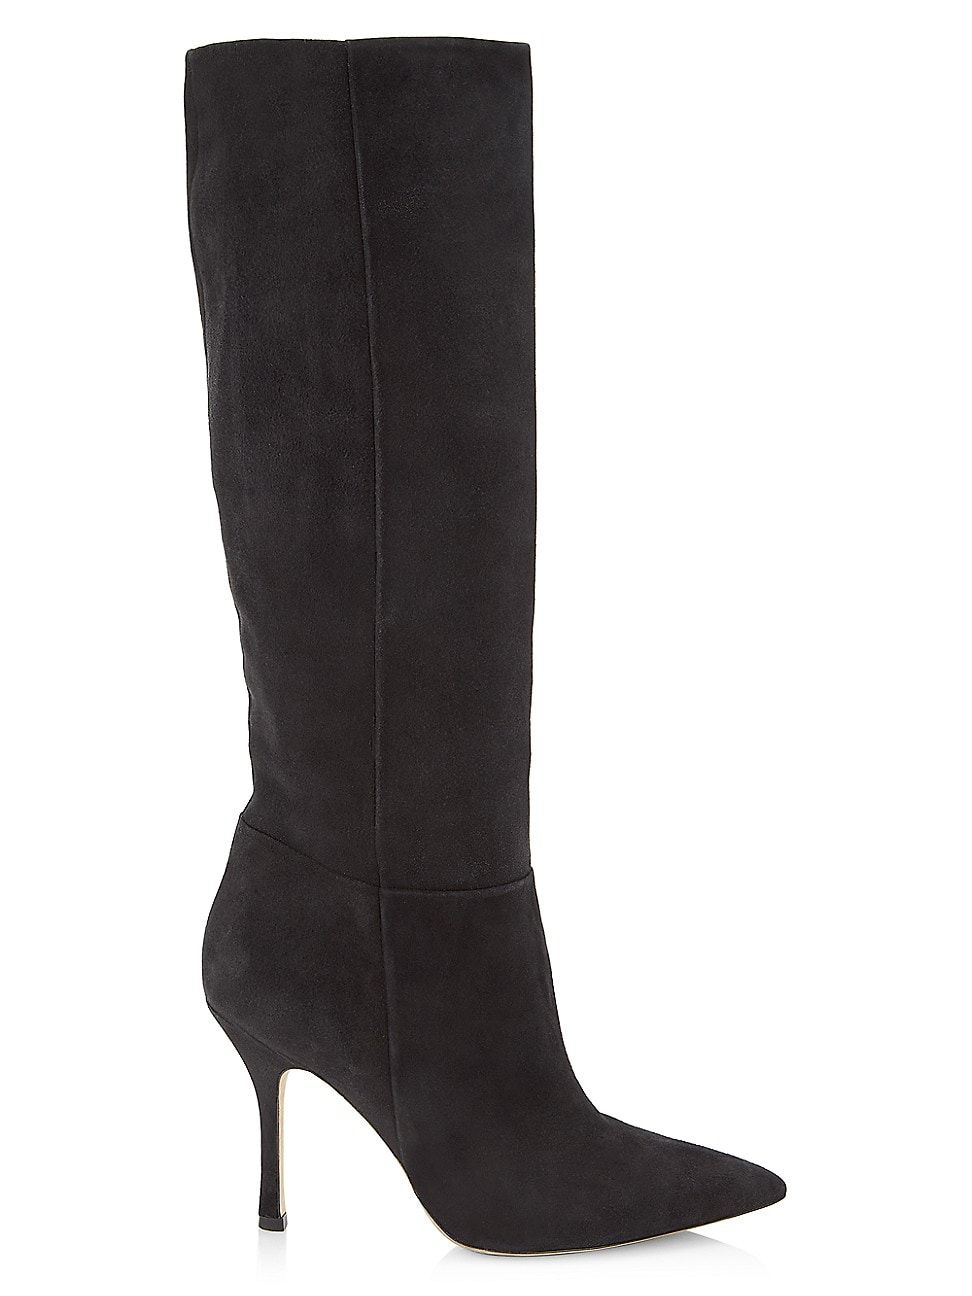 Women's Kate Tall Suede Boots - Black Suede - Size 5.5 | Saks Fifth Avenue